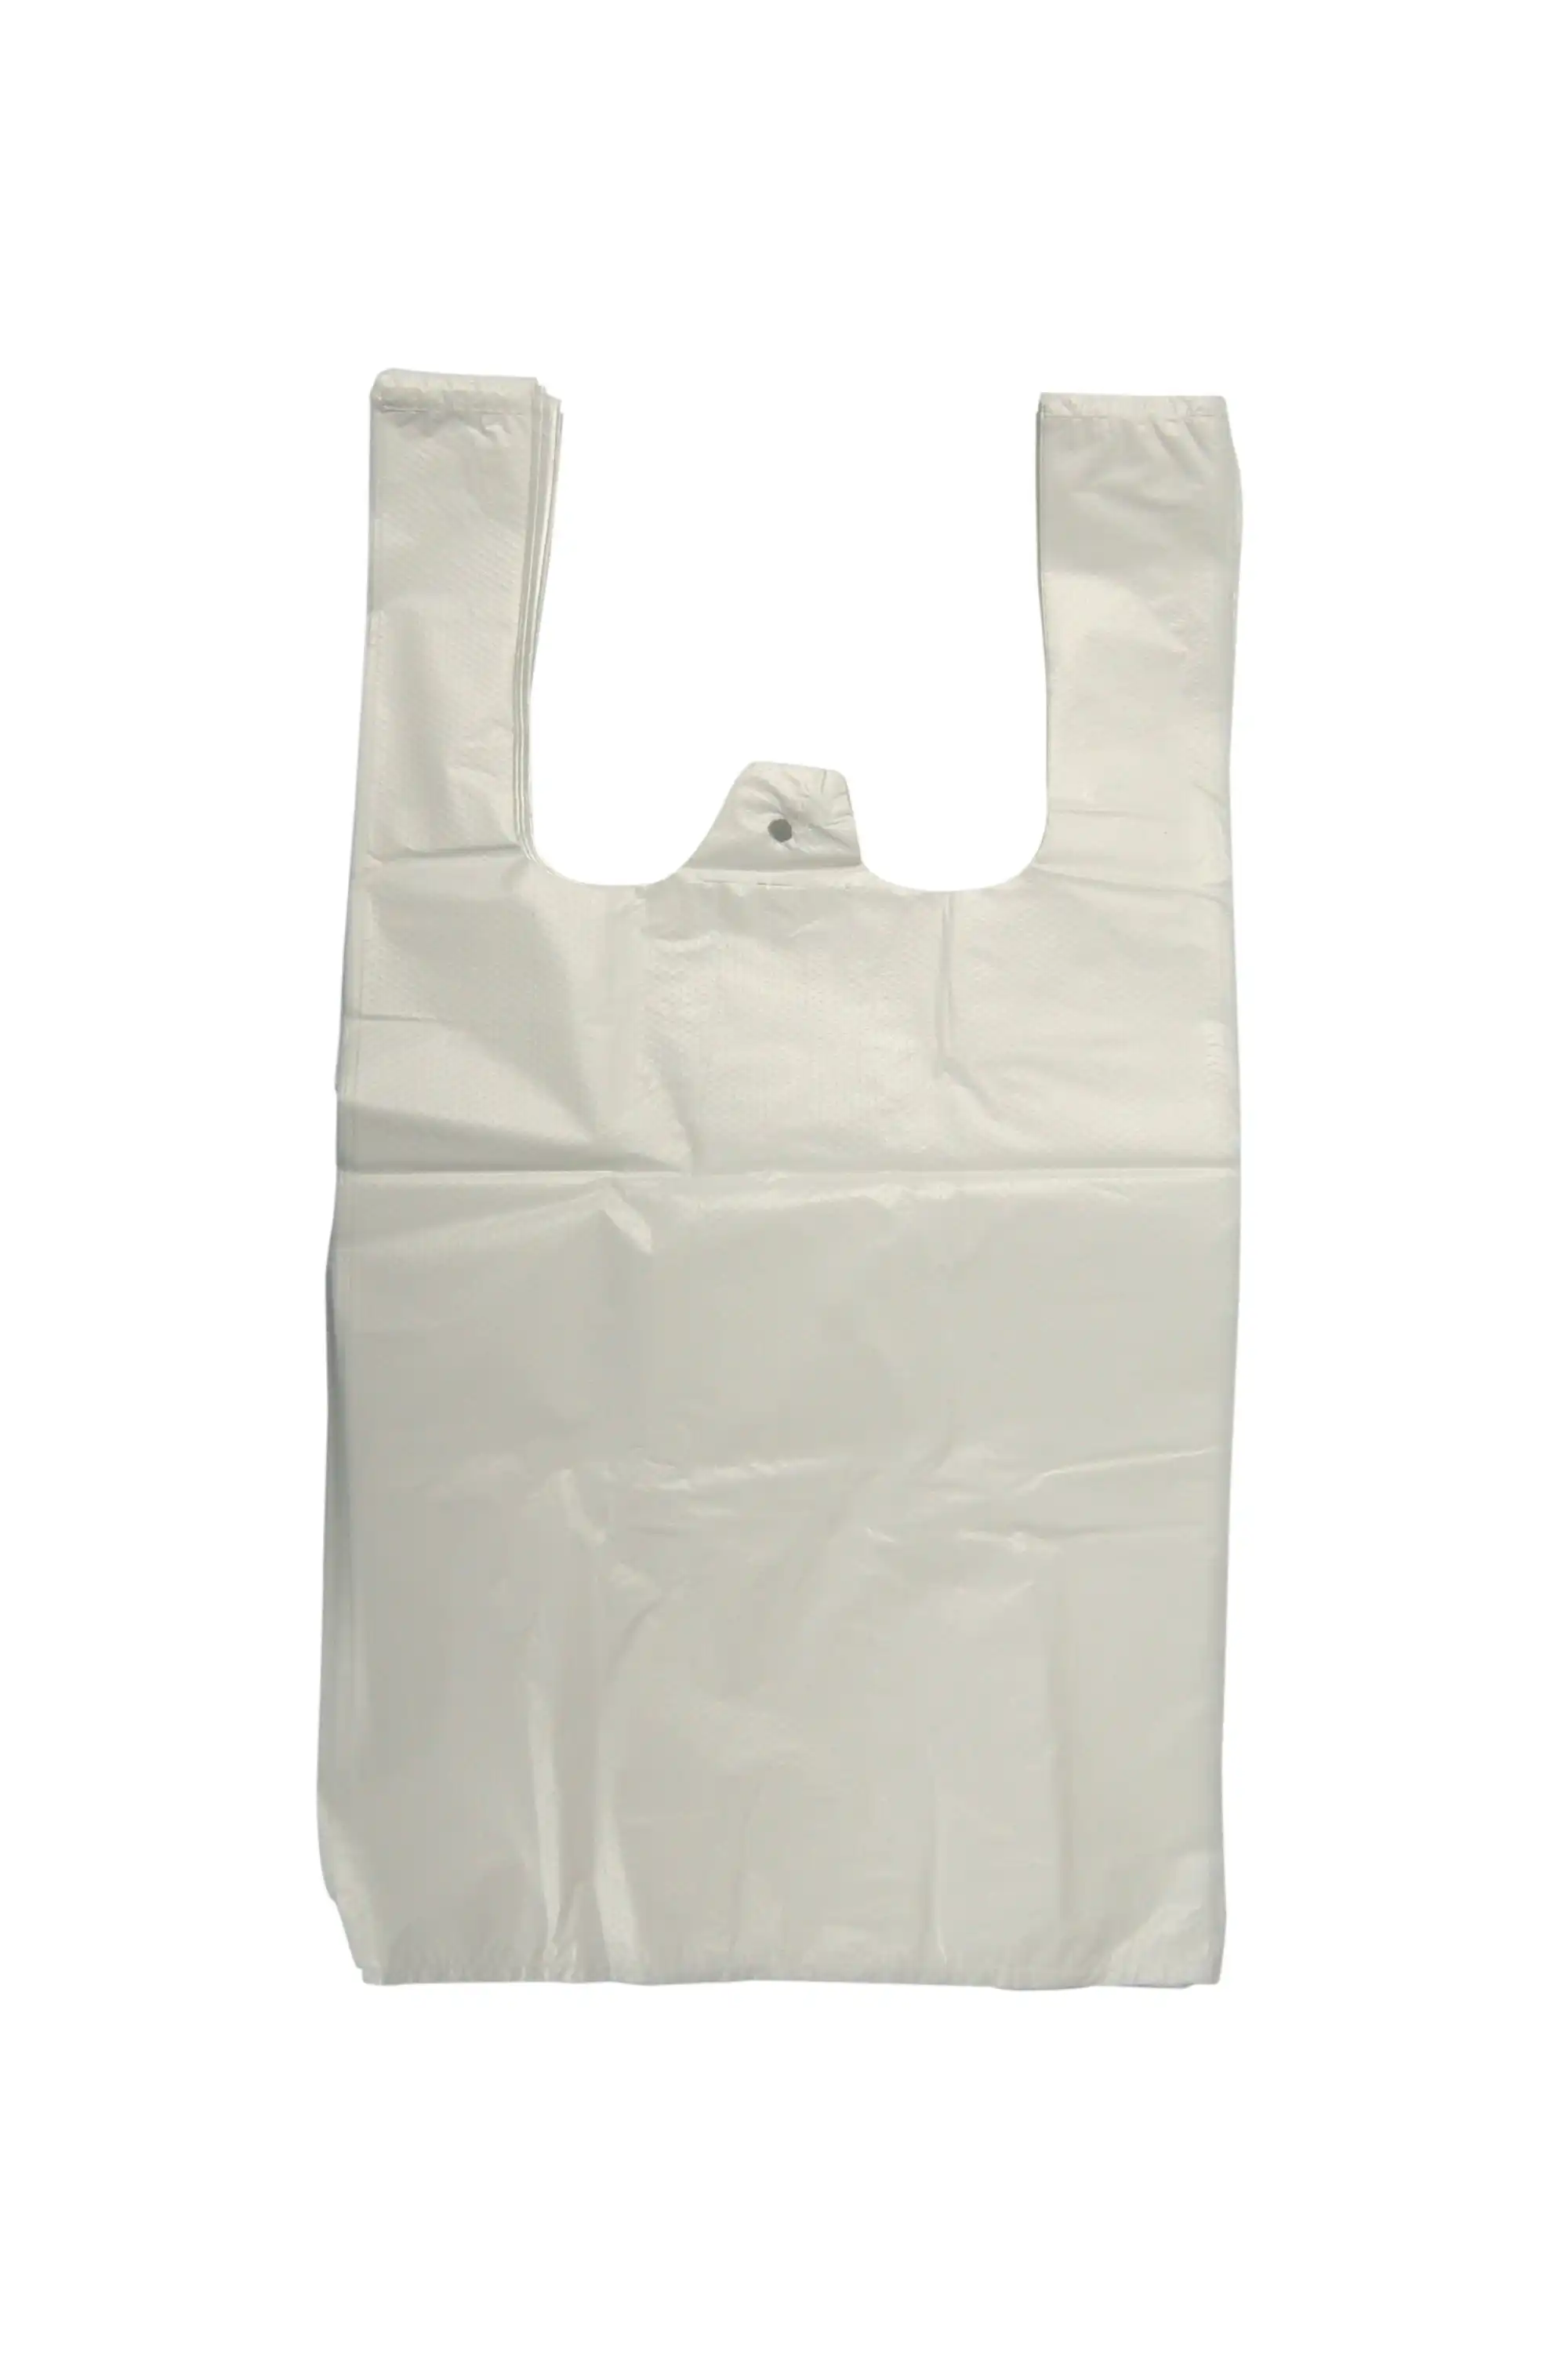 Singlet Shopping Bags, 400 x 220 x 130mm, 19 Microns, Embossed Small, White, 194/Pack, 1940/Carton